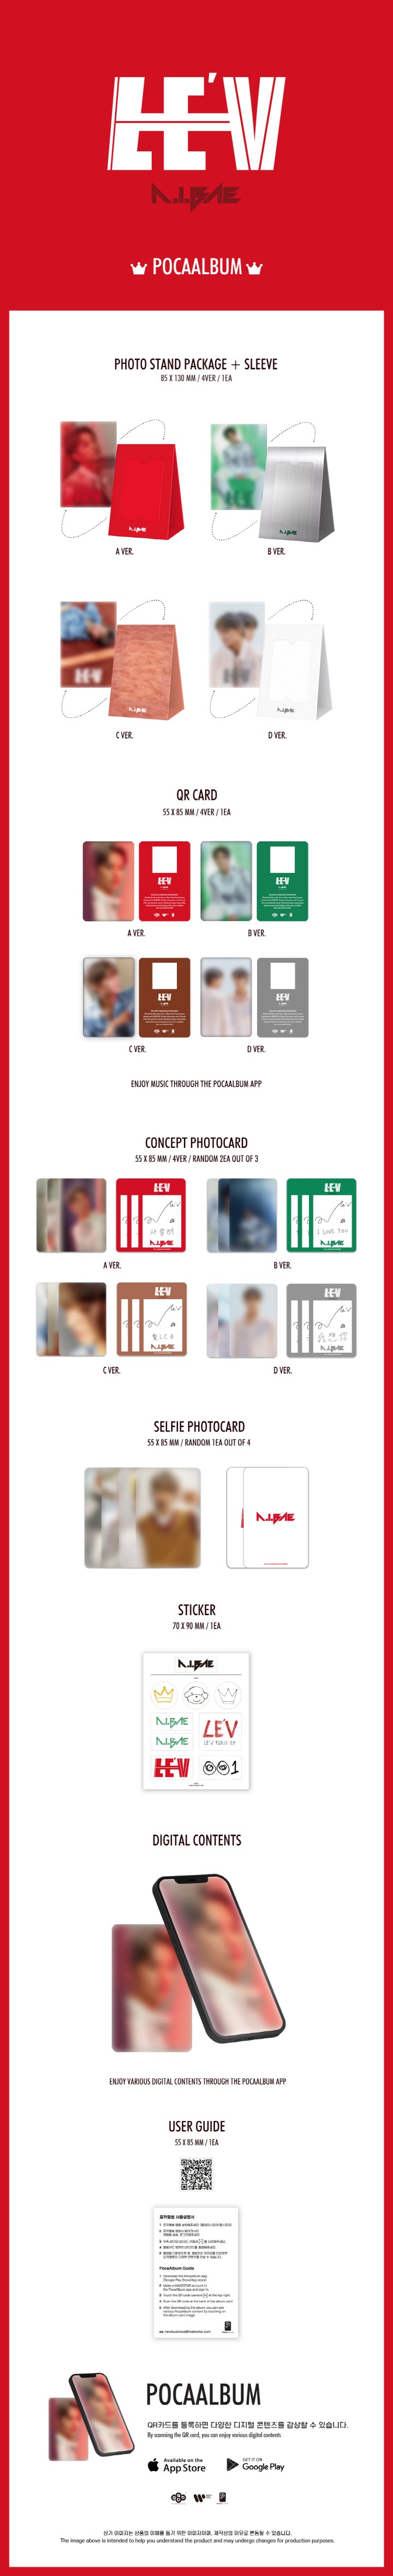 1 QR Card
1 Photo Stand Package + Sleeve
2 Concept Photo Cards (random out of 3 types)
1 Selfie Photo Card (random out of ...